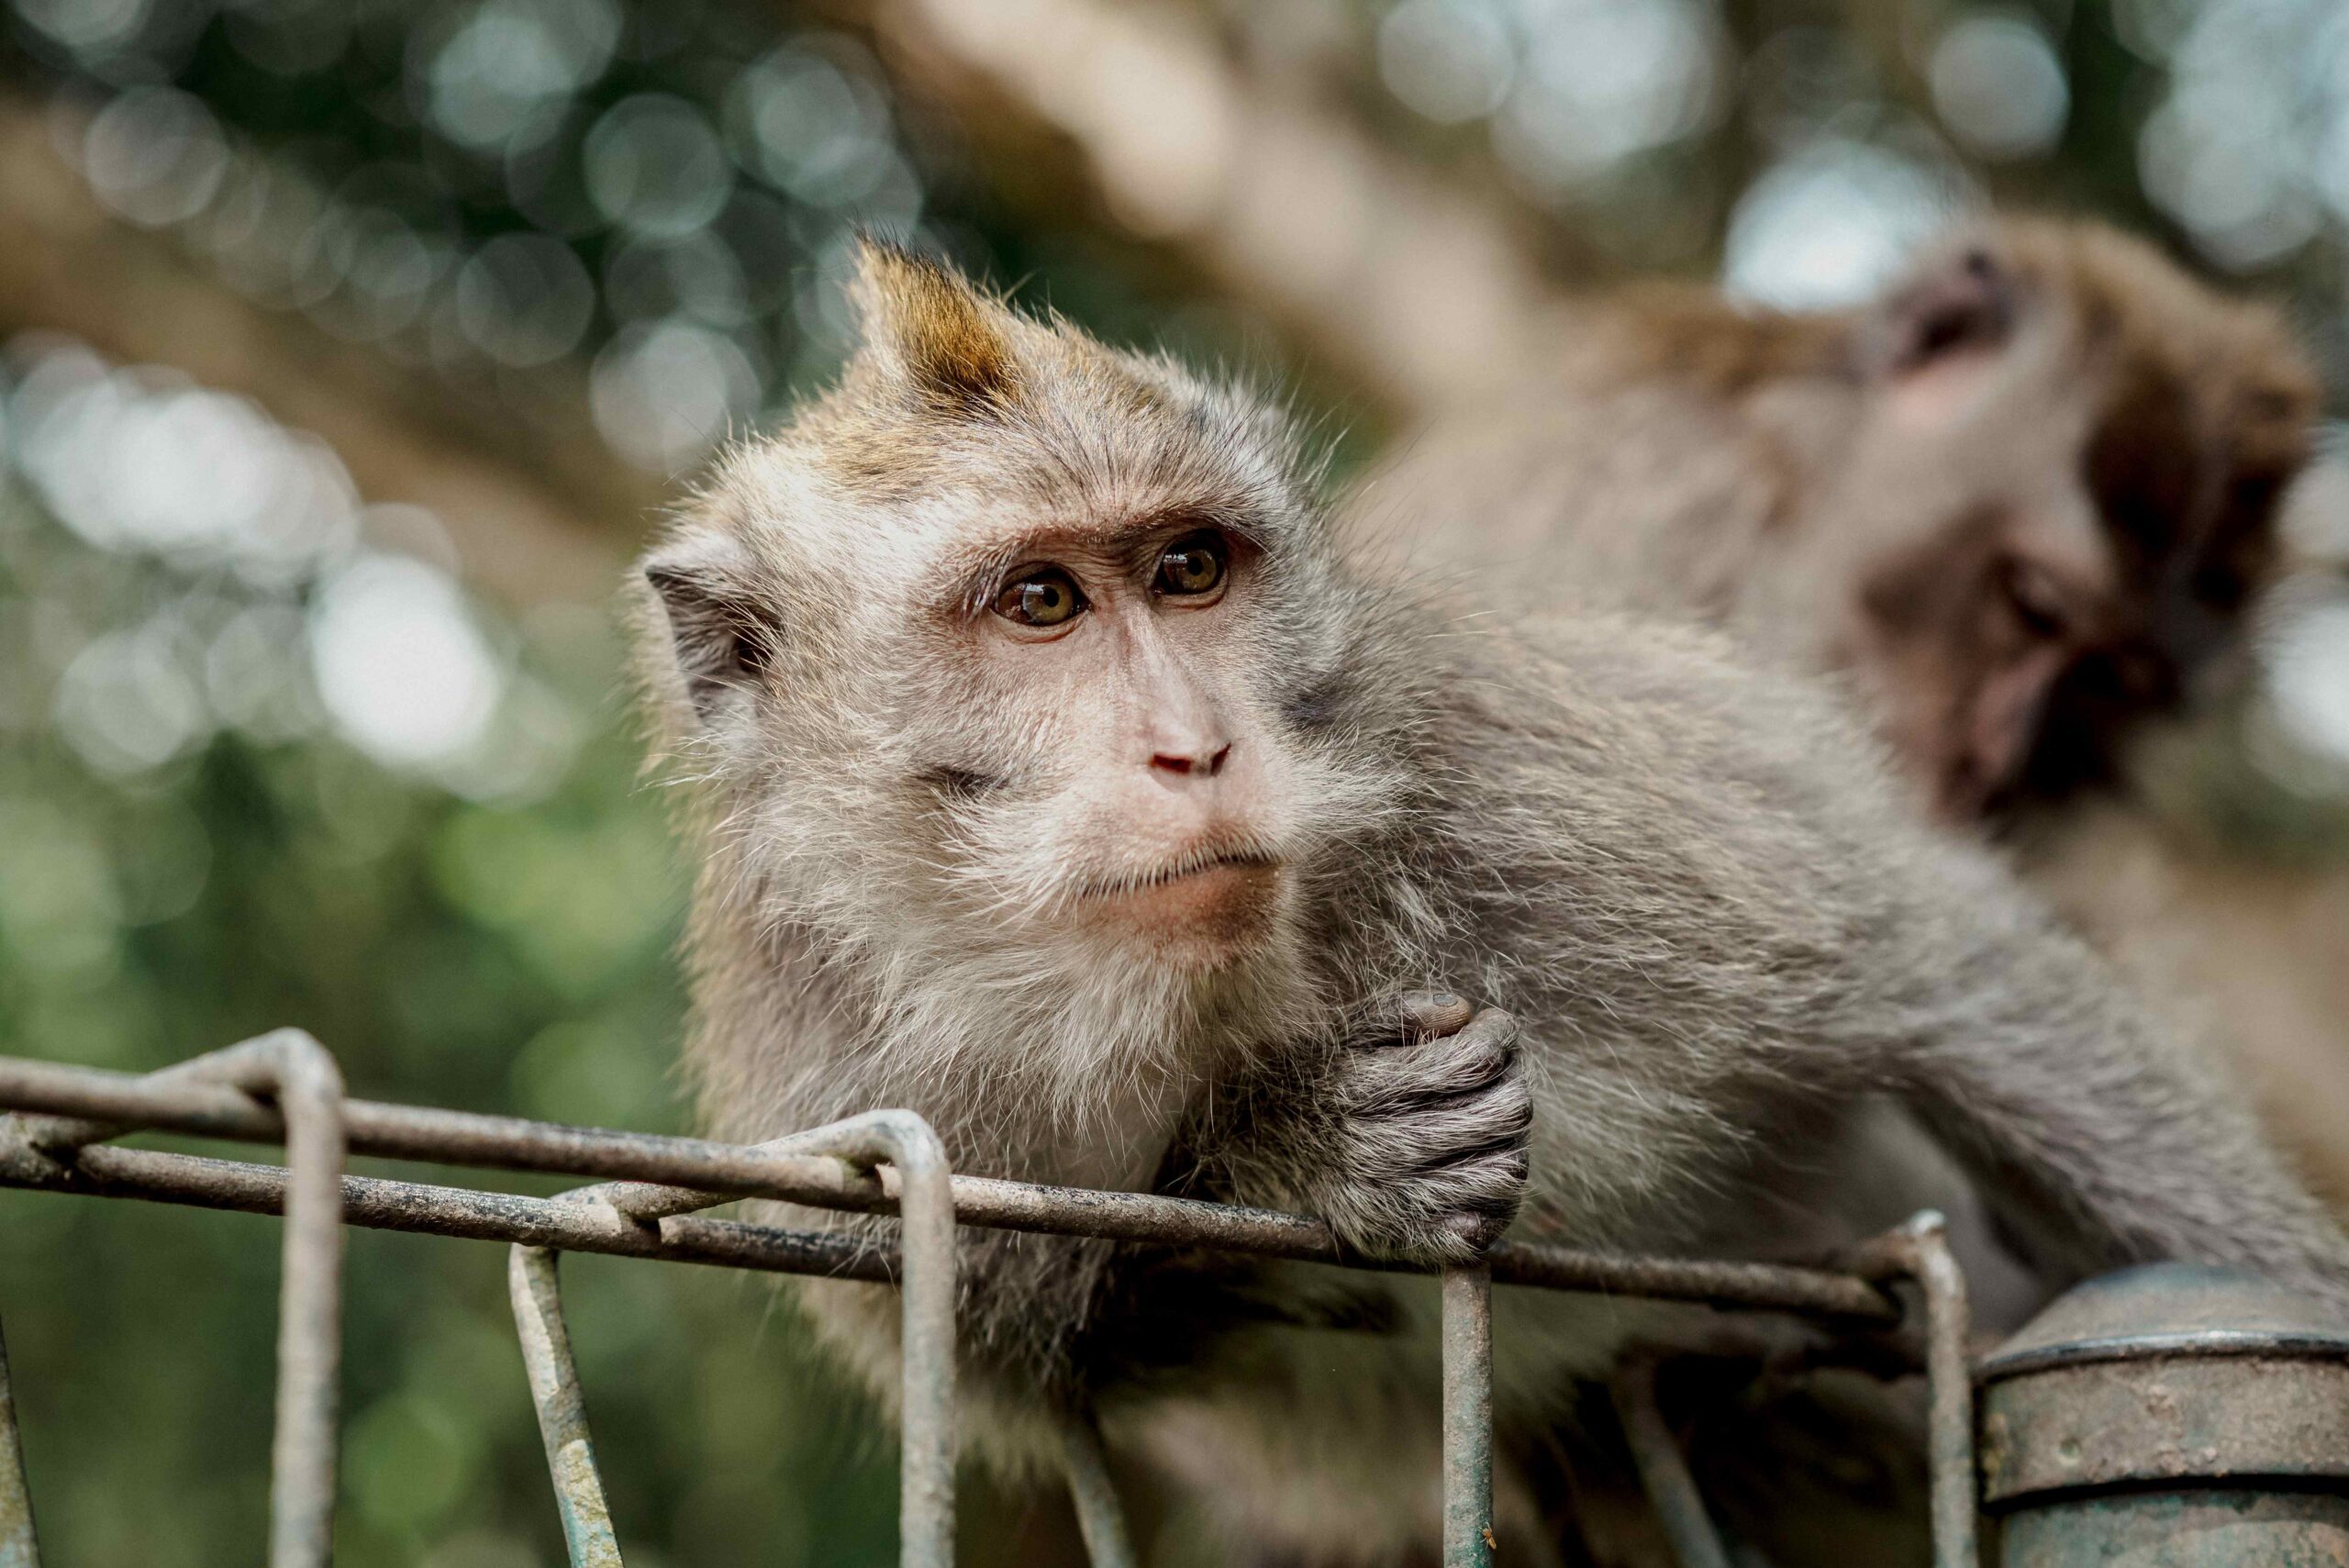 WATCH: Indonesian market sells monkey meat, other exotic animals